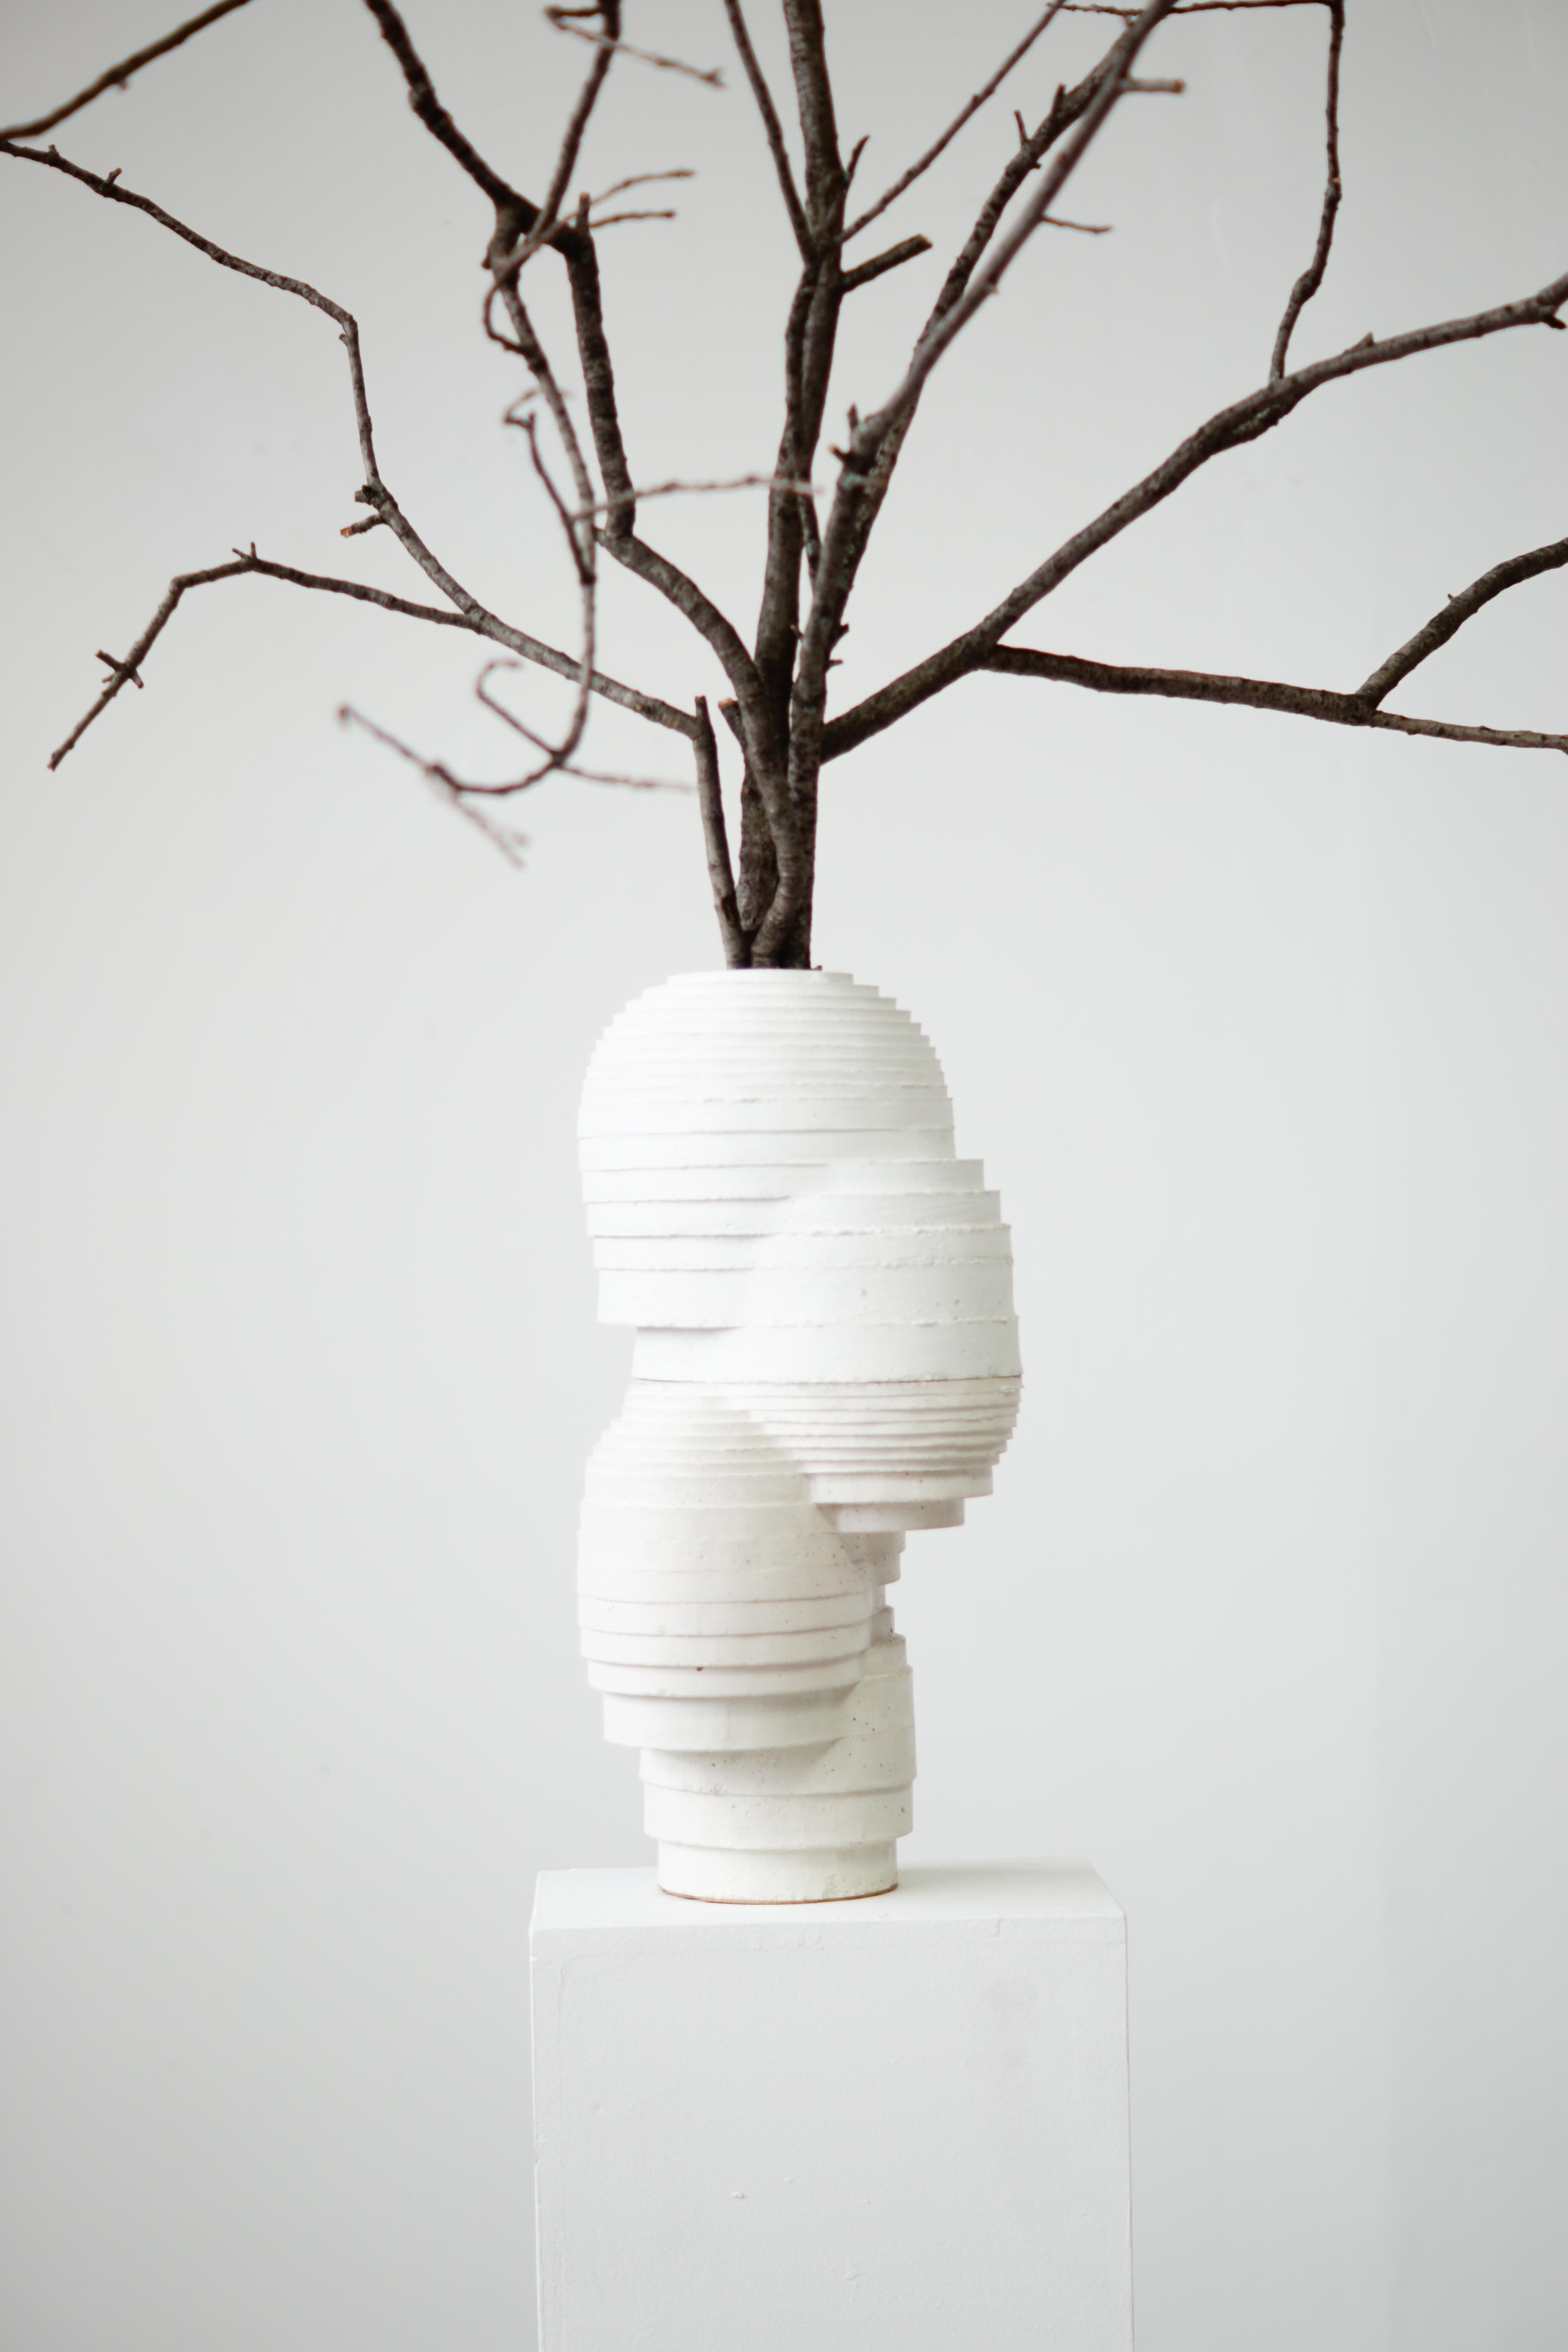 Ikebana-style vessel in two parts for indoor and outdoor use.

At the intersection of art, craft, and design, Concrete Poetics' debut collection of hand-cast cement sculptural furniture and accessories streamlines visually intriguing and dynamic